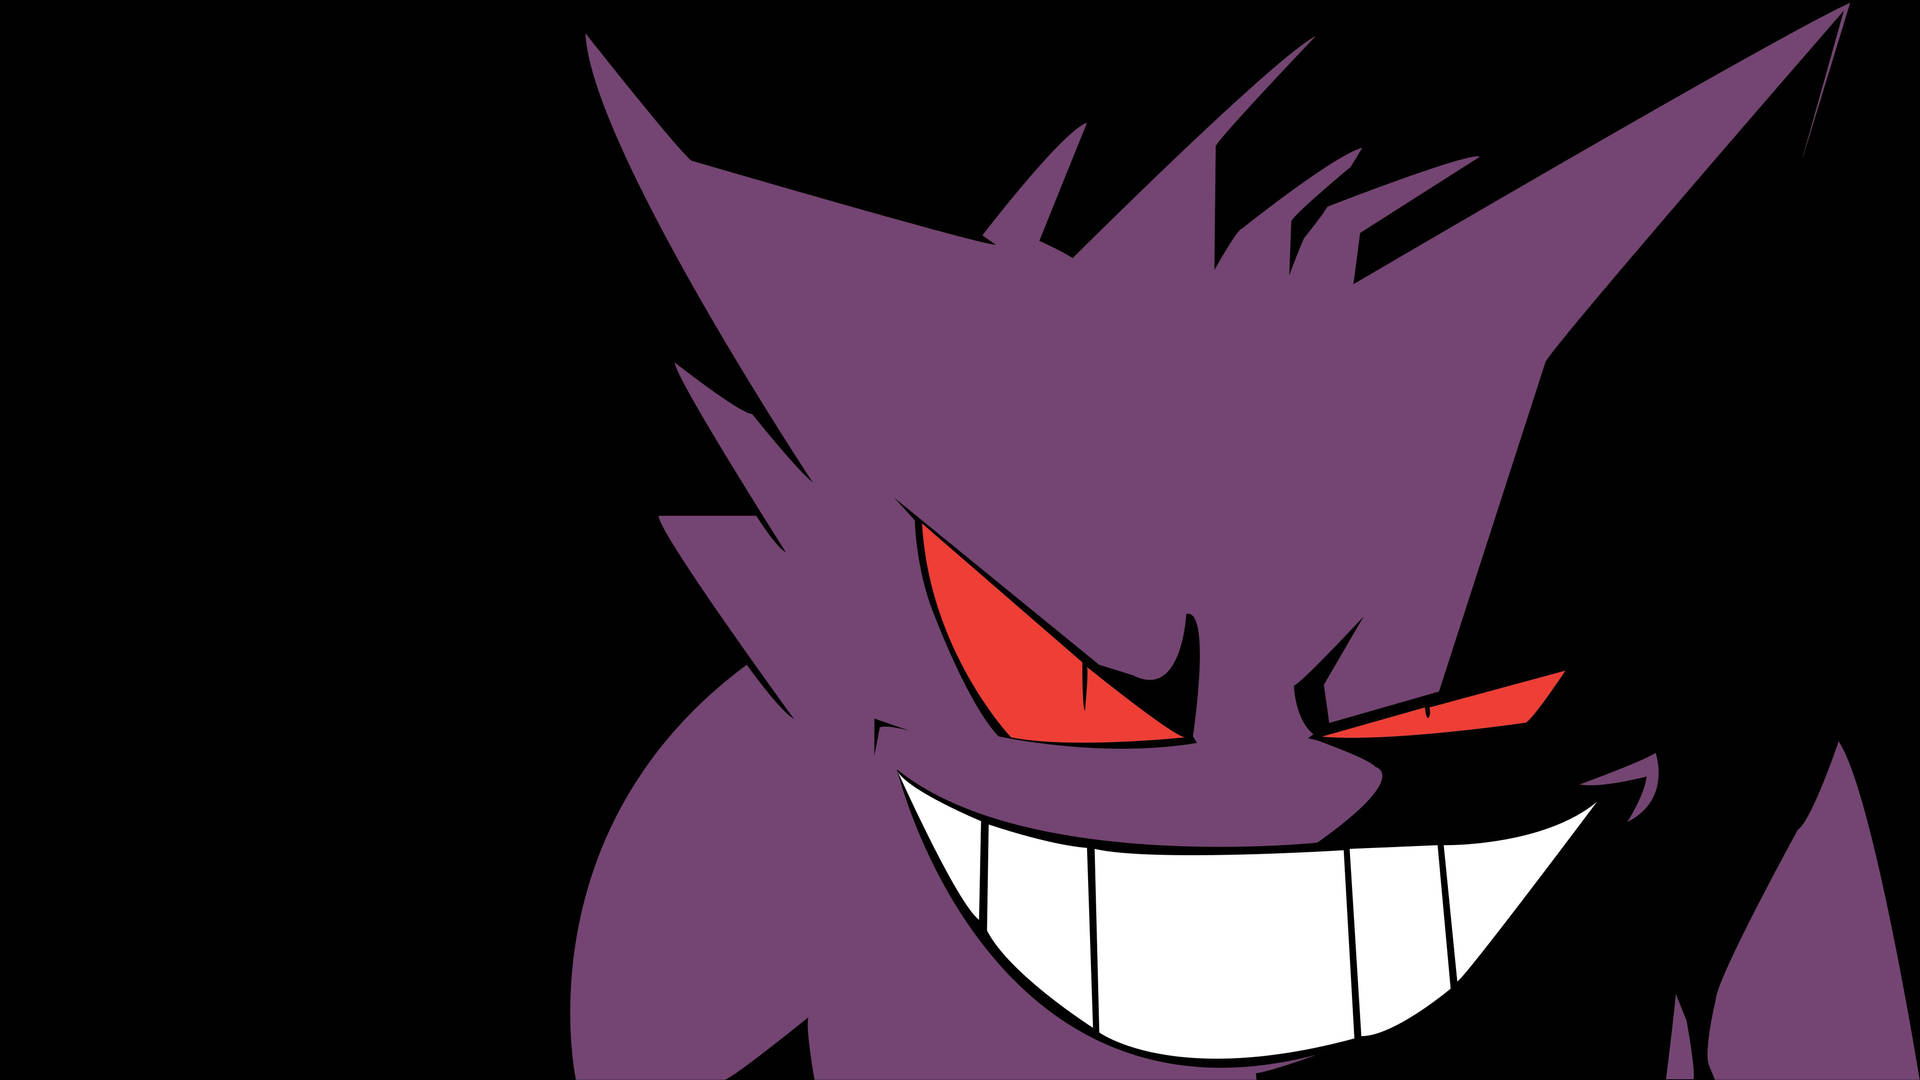 Gengar 8004X4504 Wallpaper and Background Image